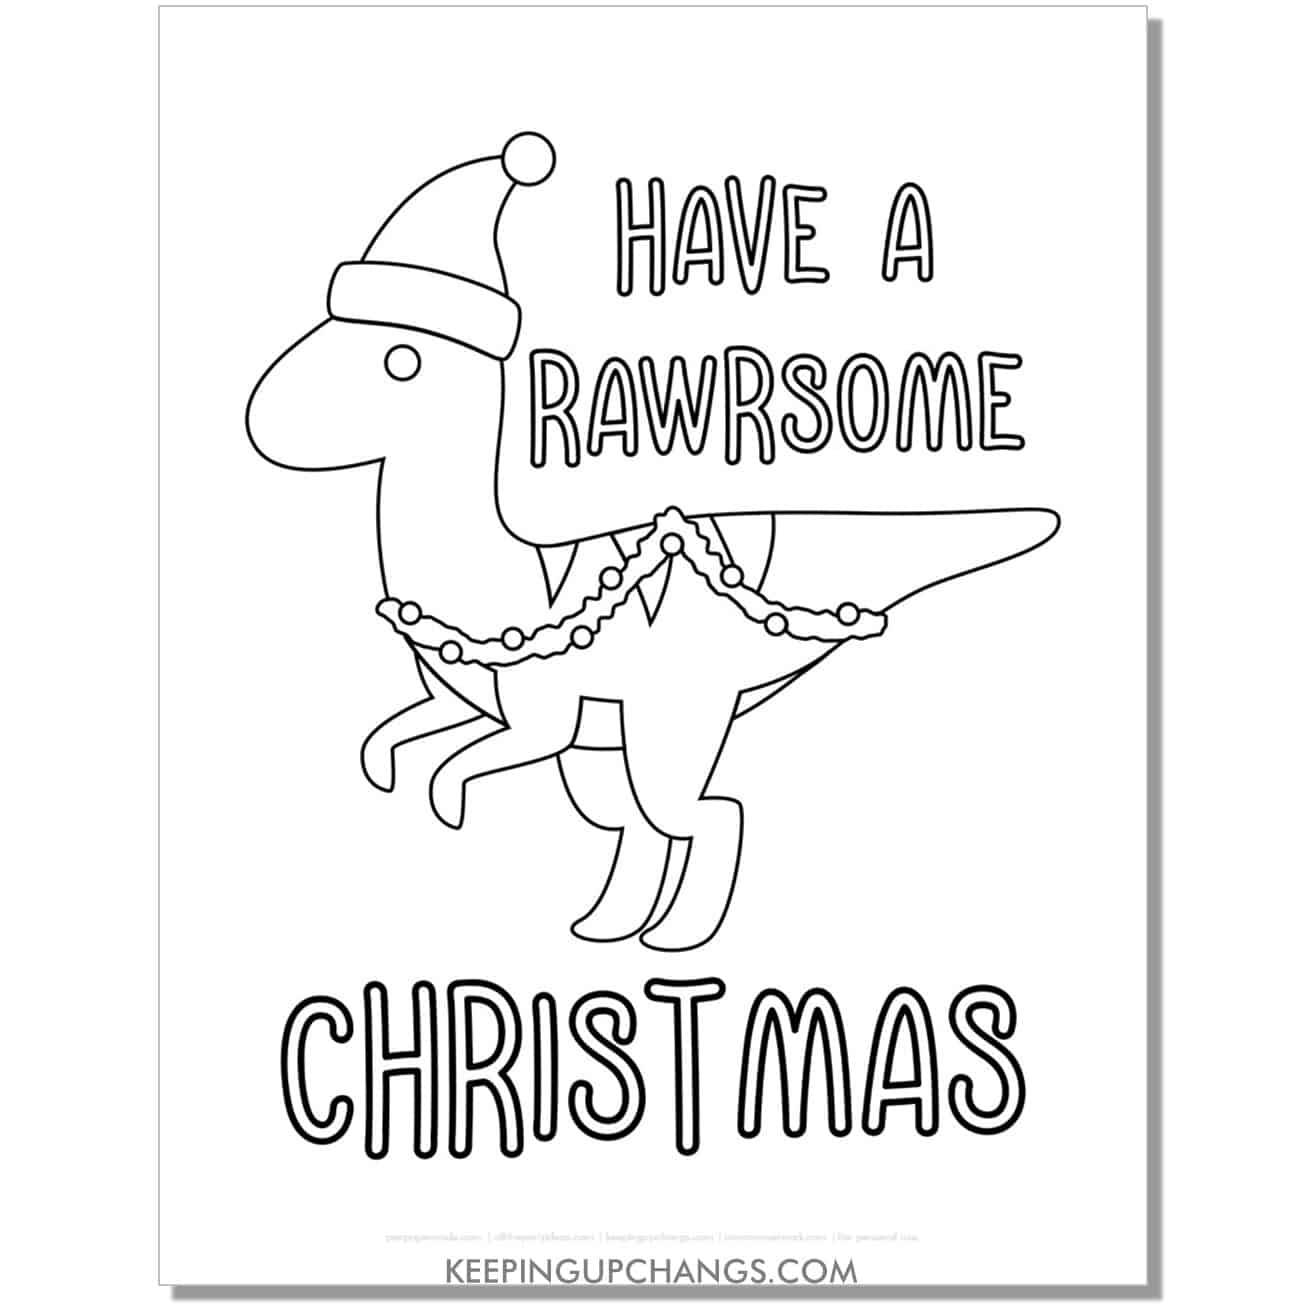 free have a rawrsome christmas velociraptor dinosaur coloring page.